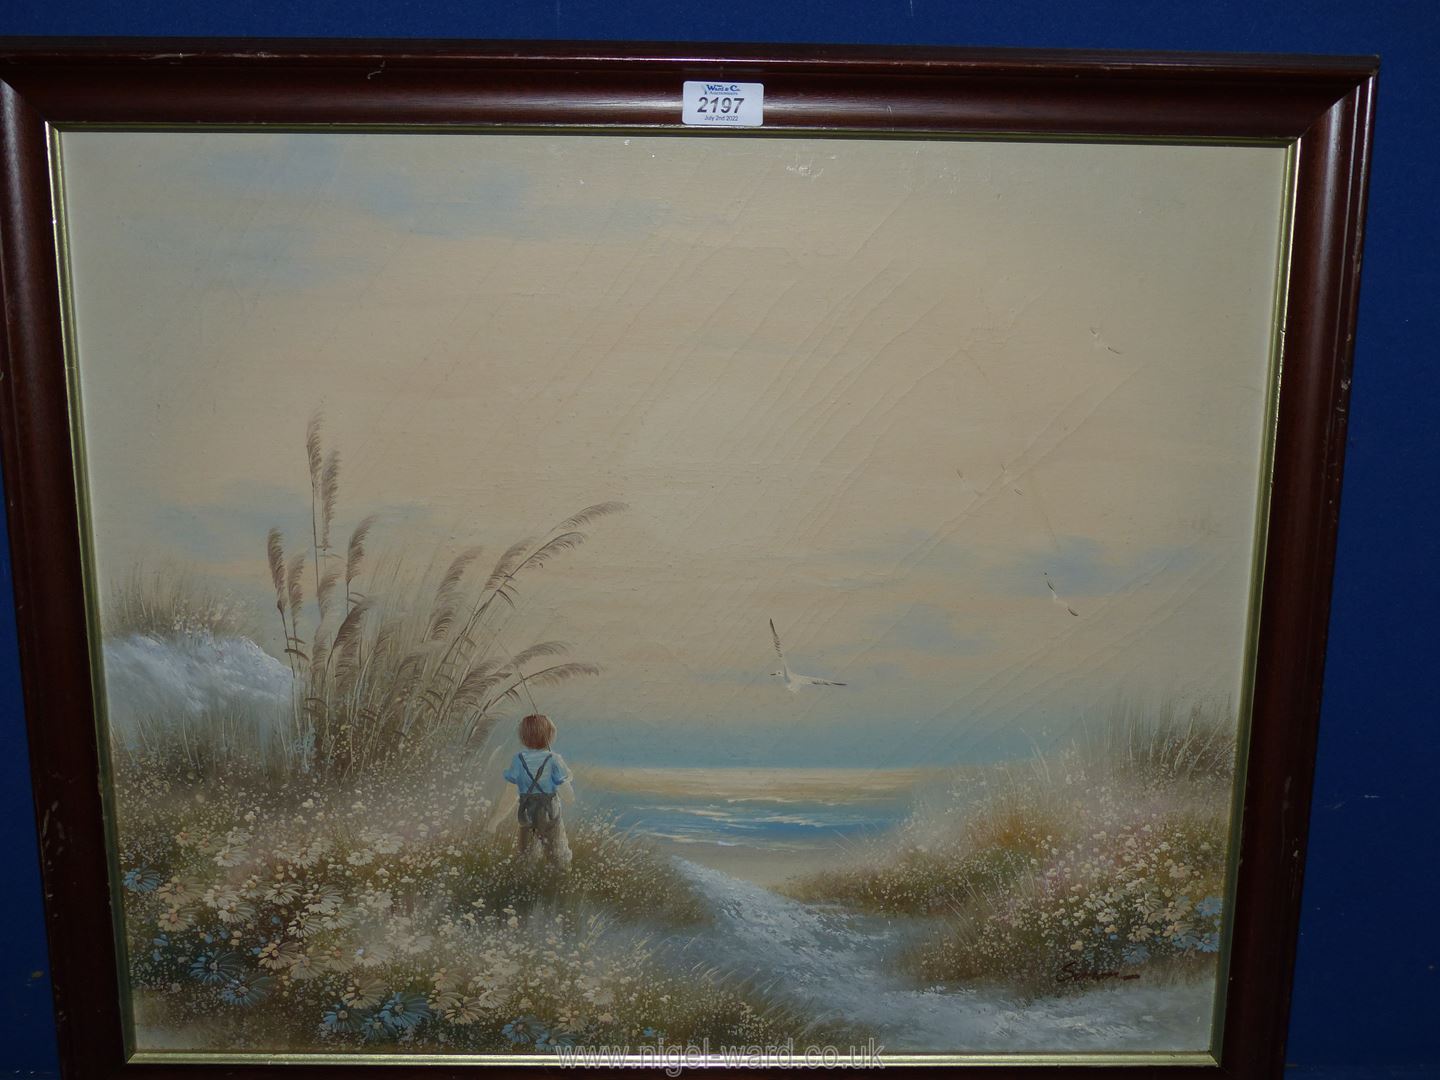 An Oil on canvas depicting a young boy on a beach.